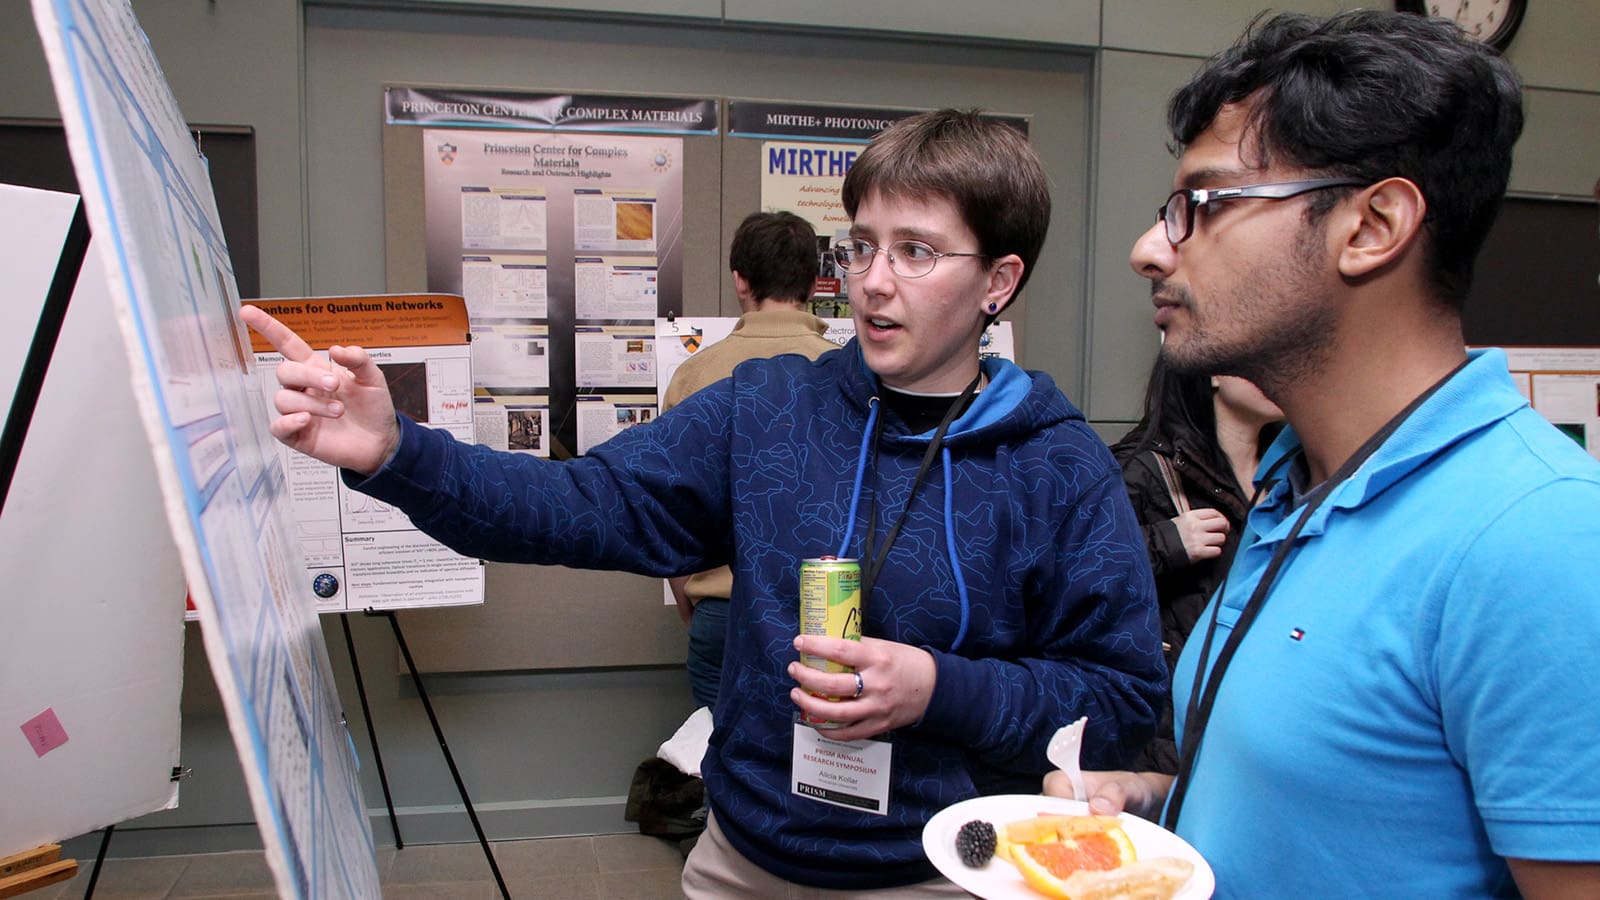 Researchers discuss recent work during "poster session"